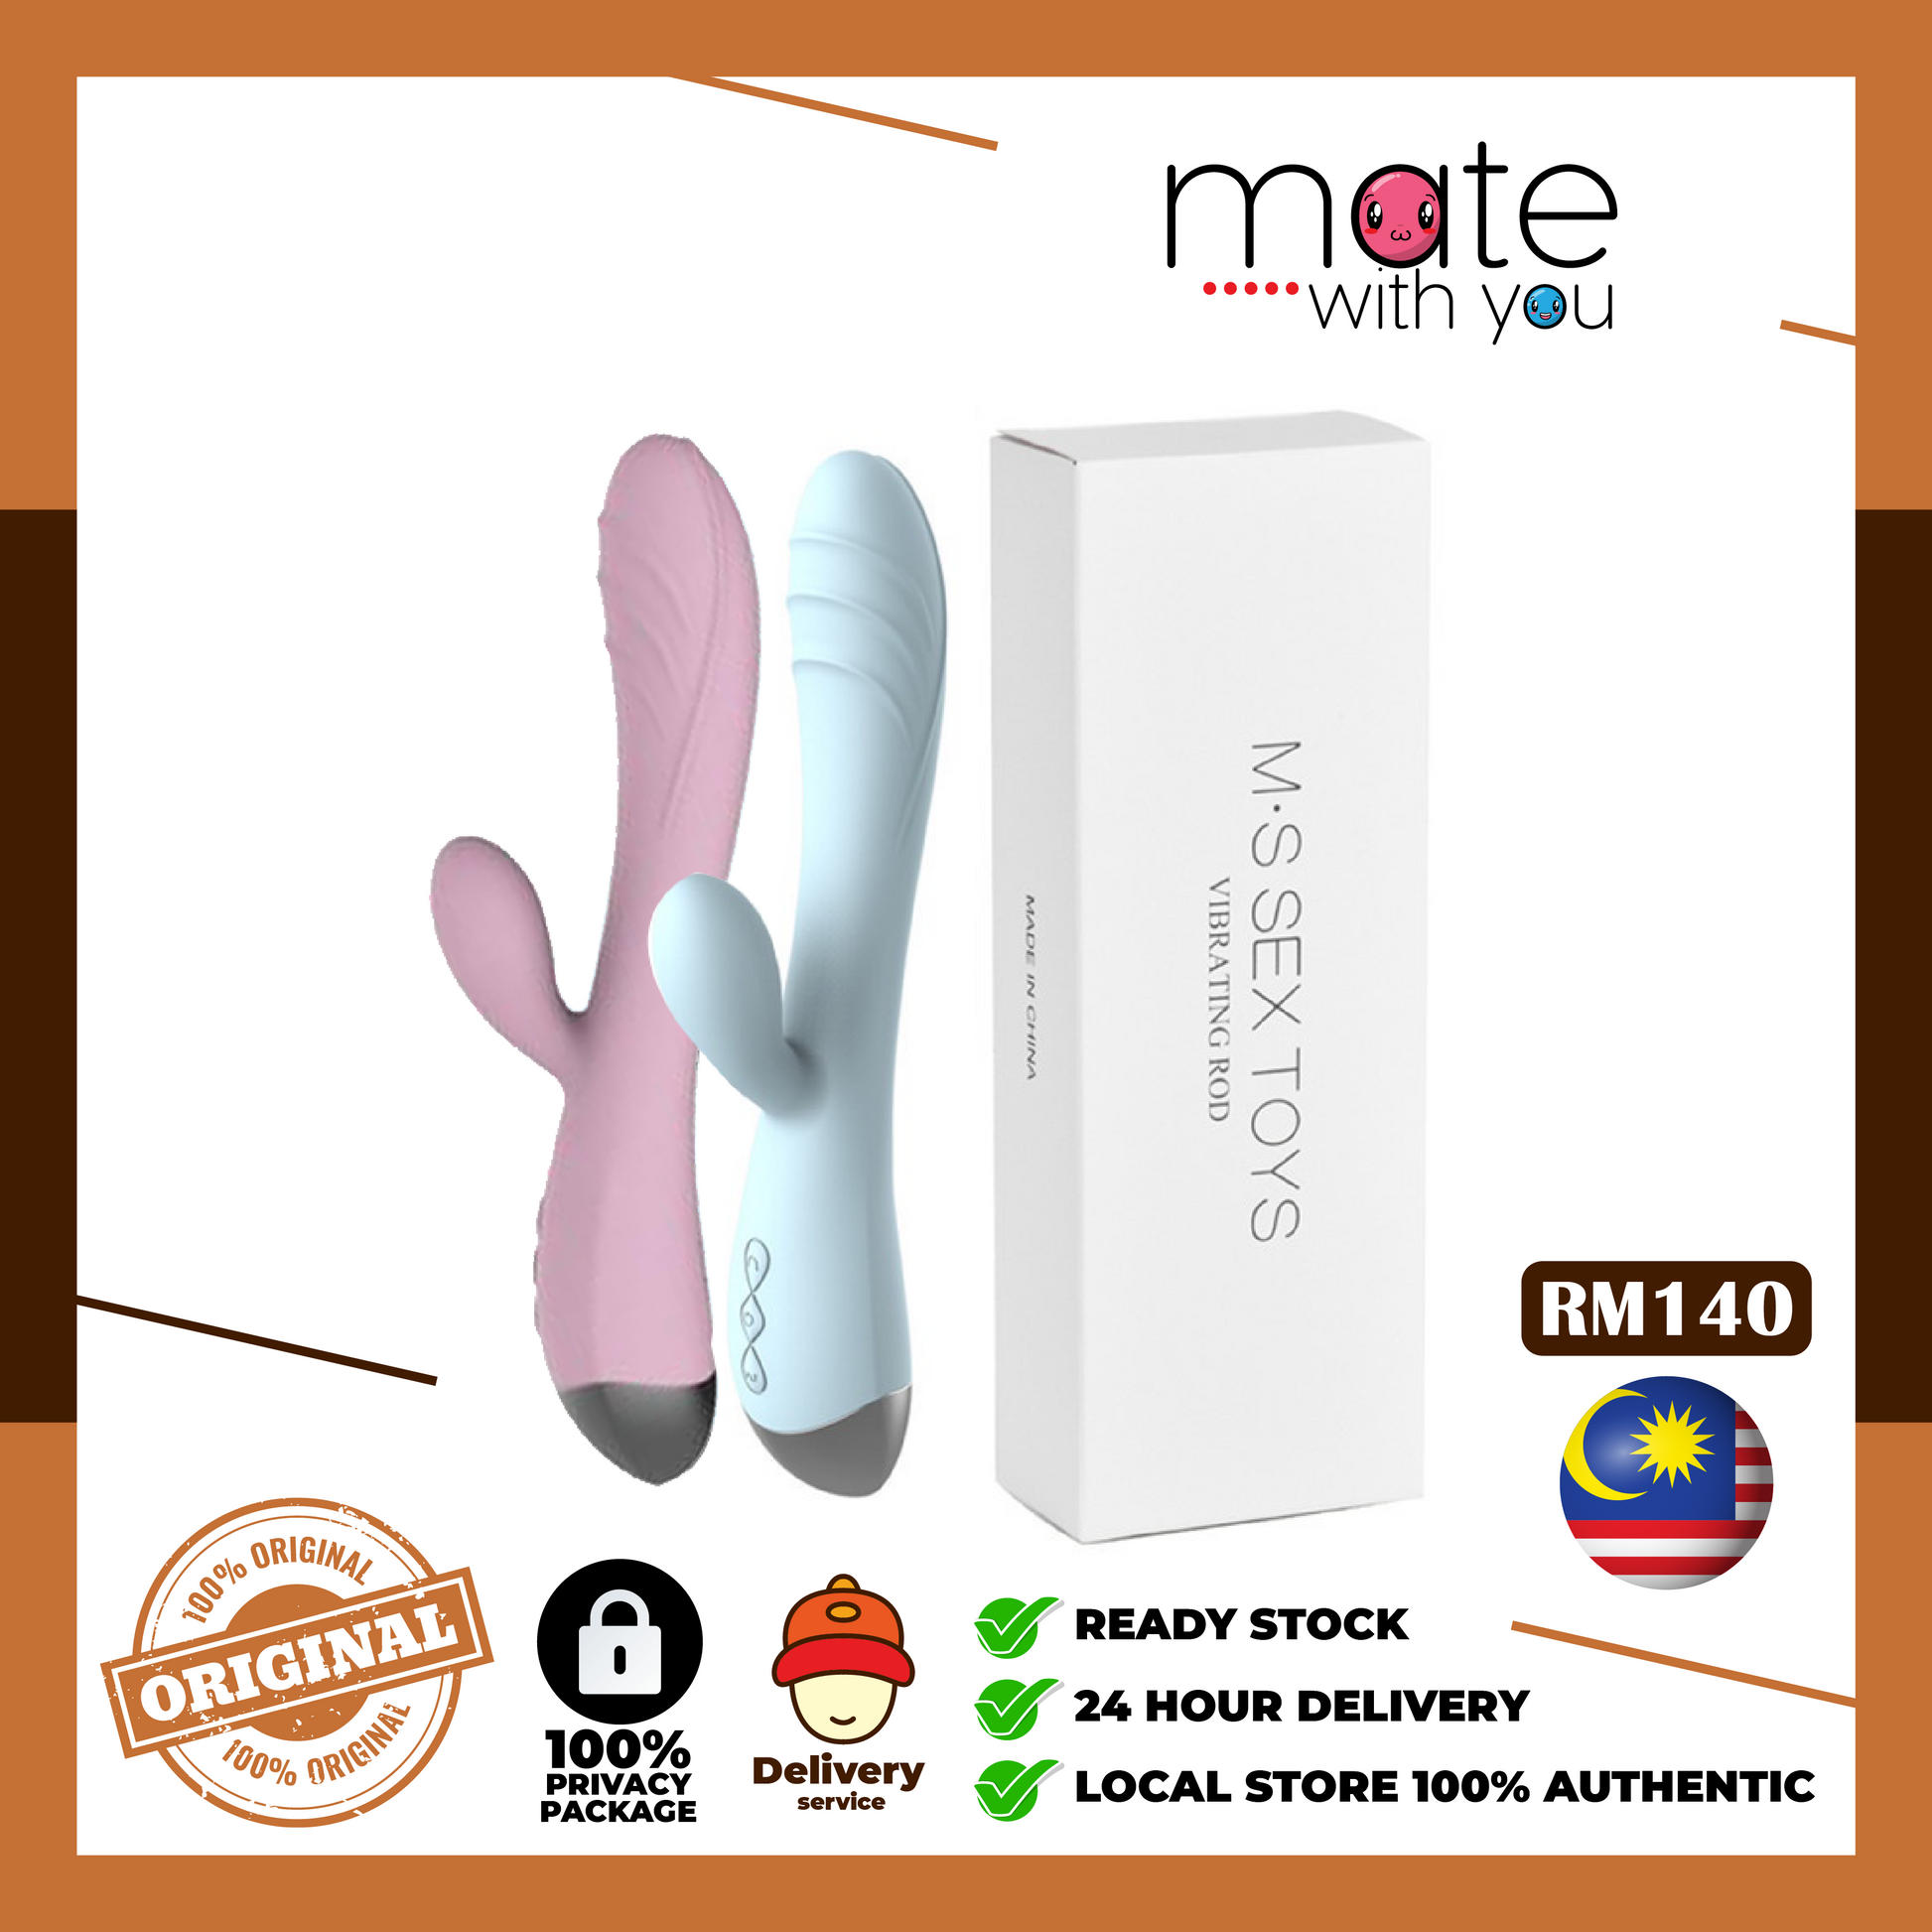 Mate With You | Ready Stock Malaysia. 100% Original, 100% privacy, 100% authentic, male/female, straight/gay, solo fun, we have the adult toys. We Selling Sex Vibrator, Dildo, Masturbator, Vacuum Pump, Silicone Ring. 100% original【Rechargeable】G-Spot Vibrator Massager vibrate climax women (dildo-shape) Sex Toy For Women fake penis 自慰棒 Adult Toys